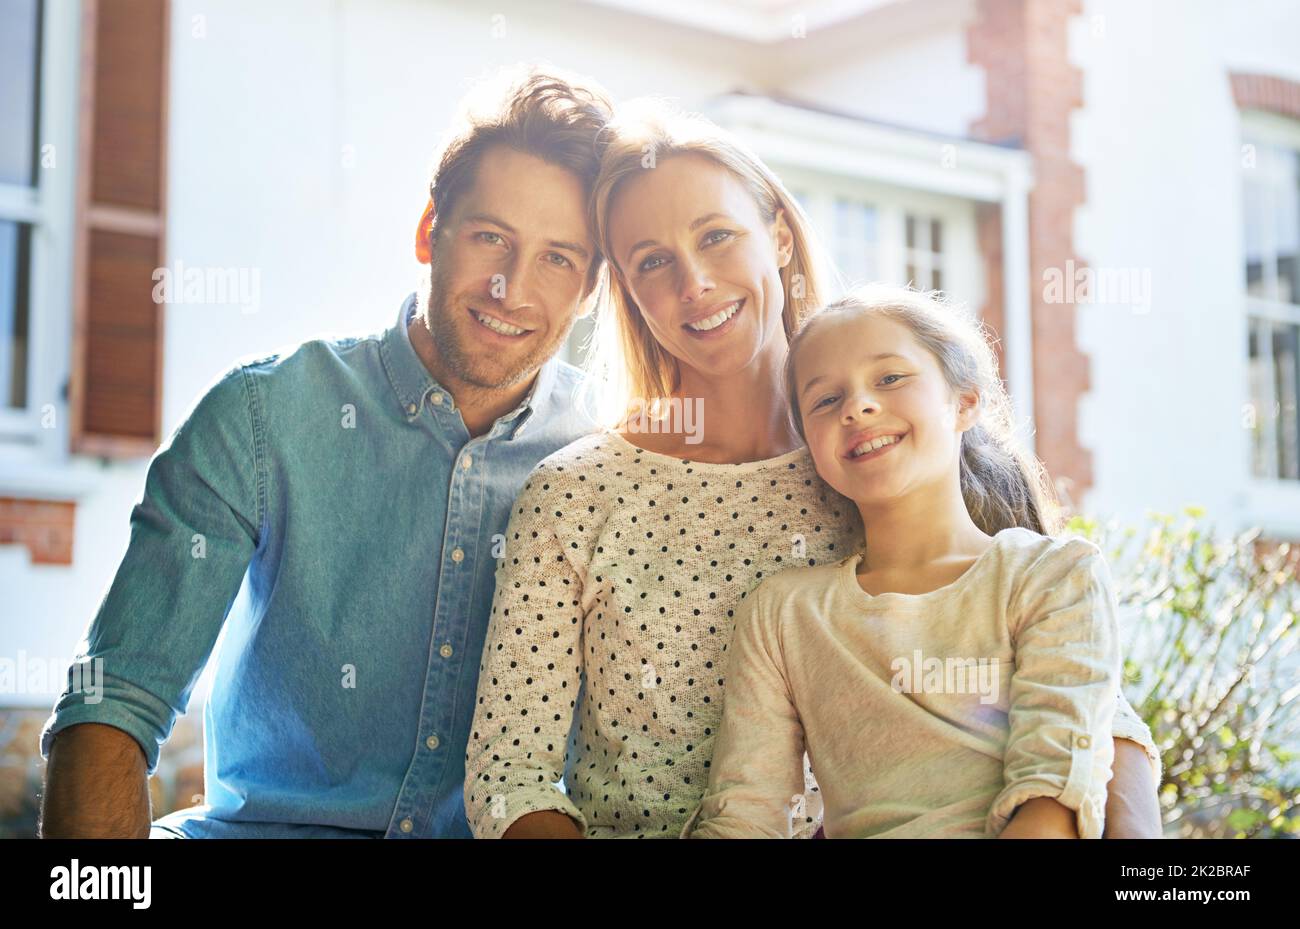 Family is a gift that lasts forever. Portrait of a family of three spending time together. Stock Photo